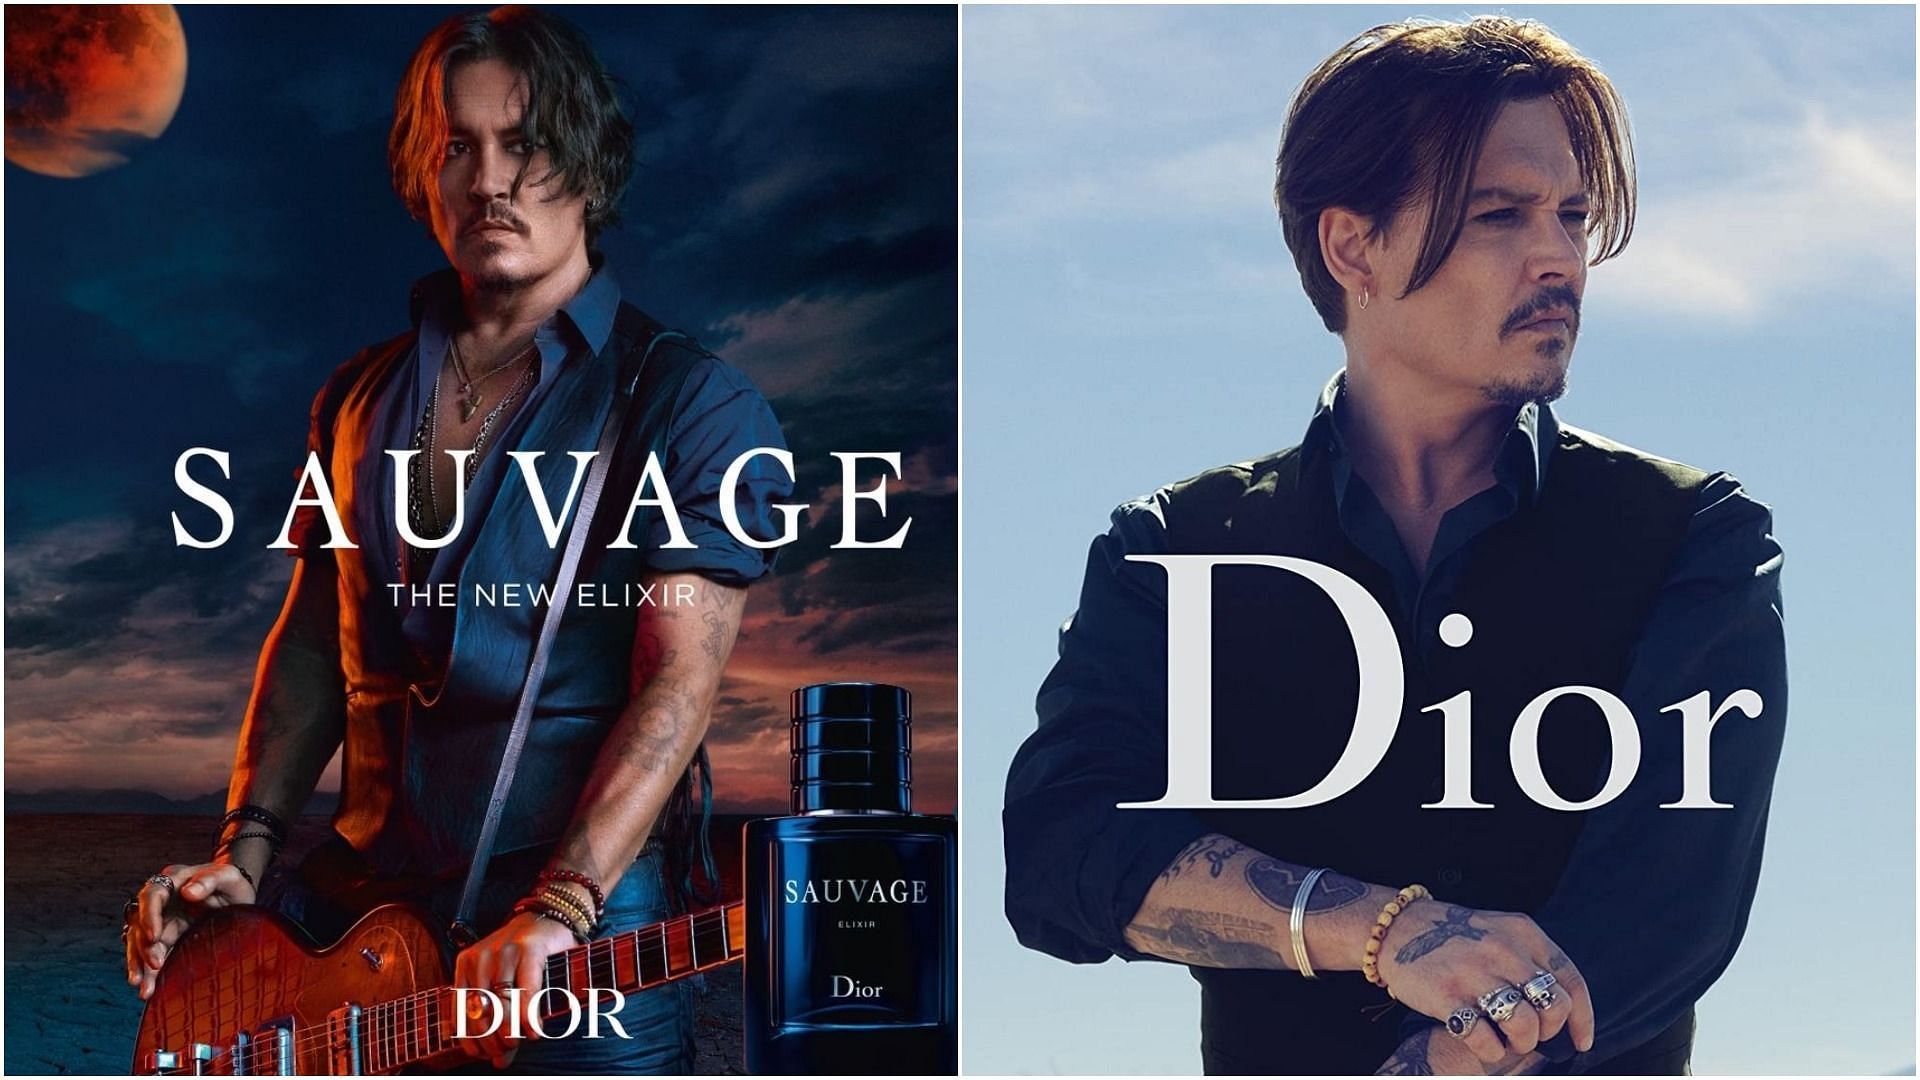 Johnny Depps New Deal With Dior Is Reportedly Worth Over 20 Million